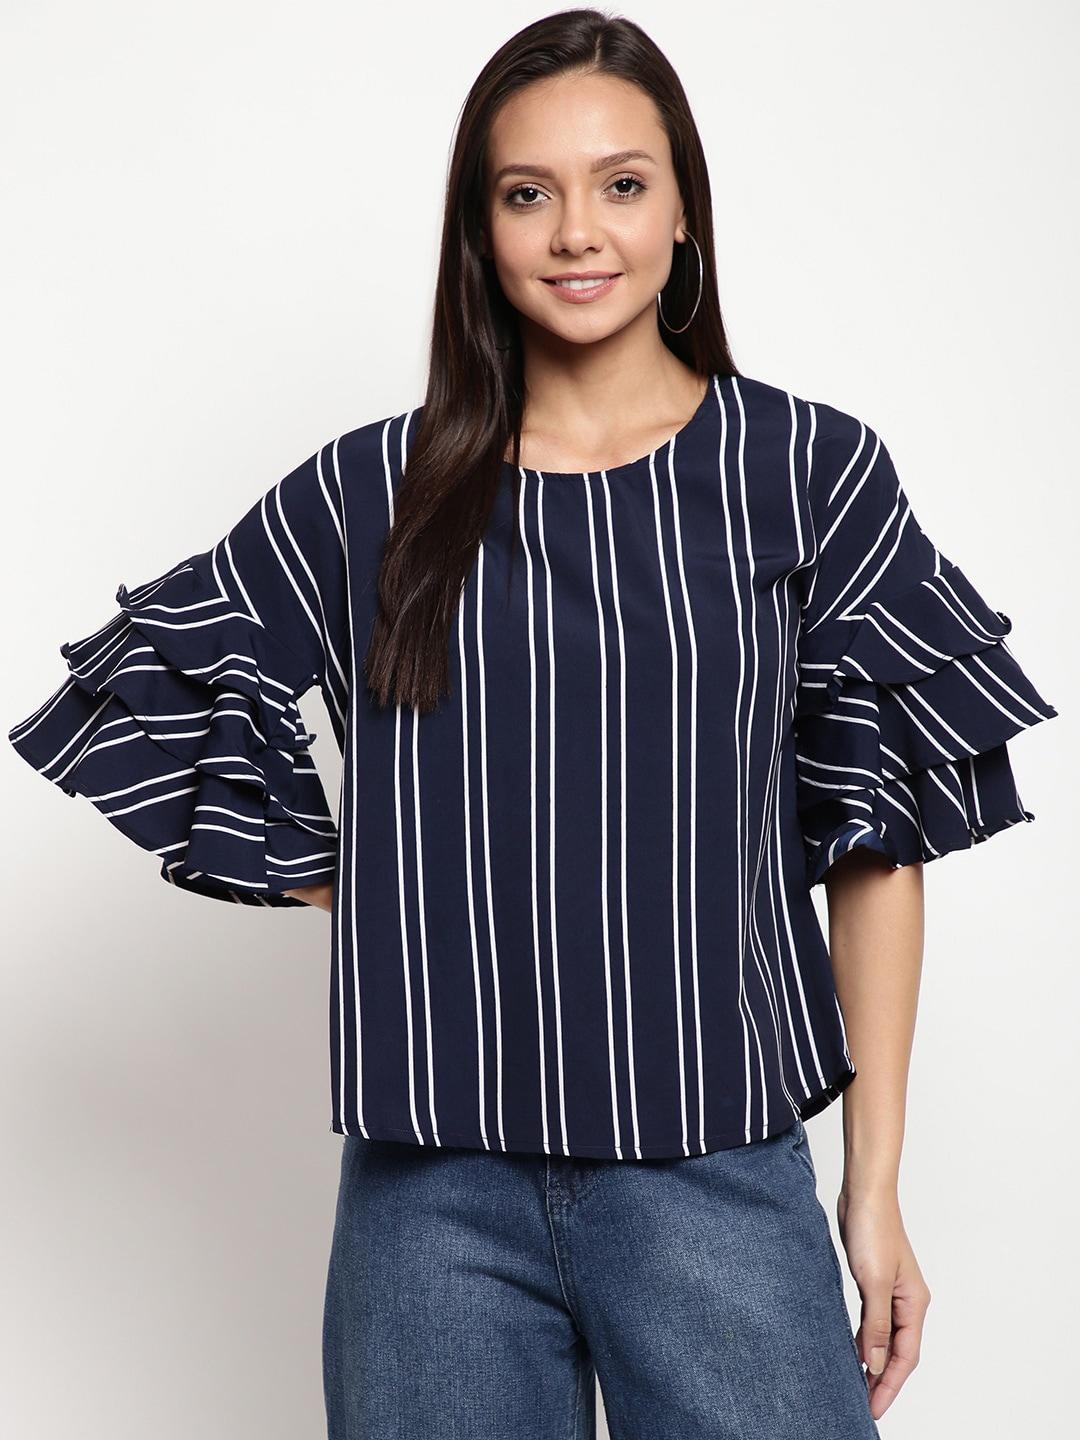 mayra-vertical-striped-bell-sleeves-top